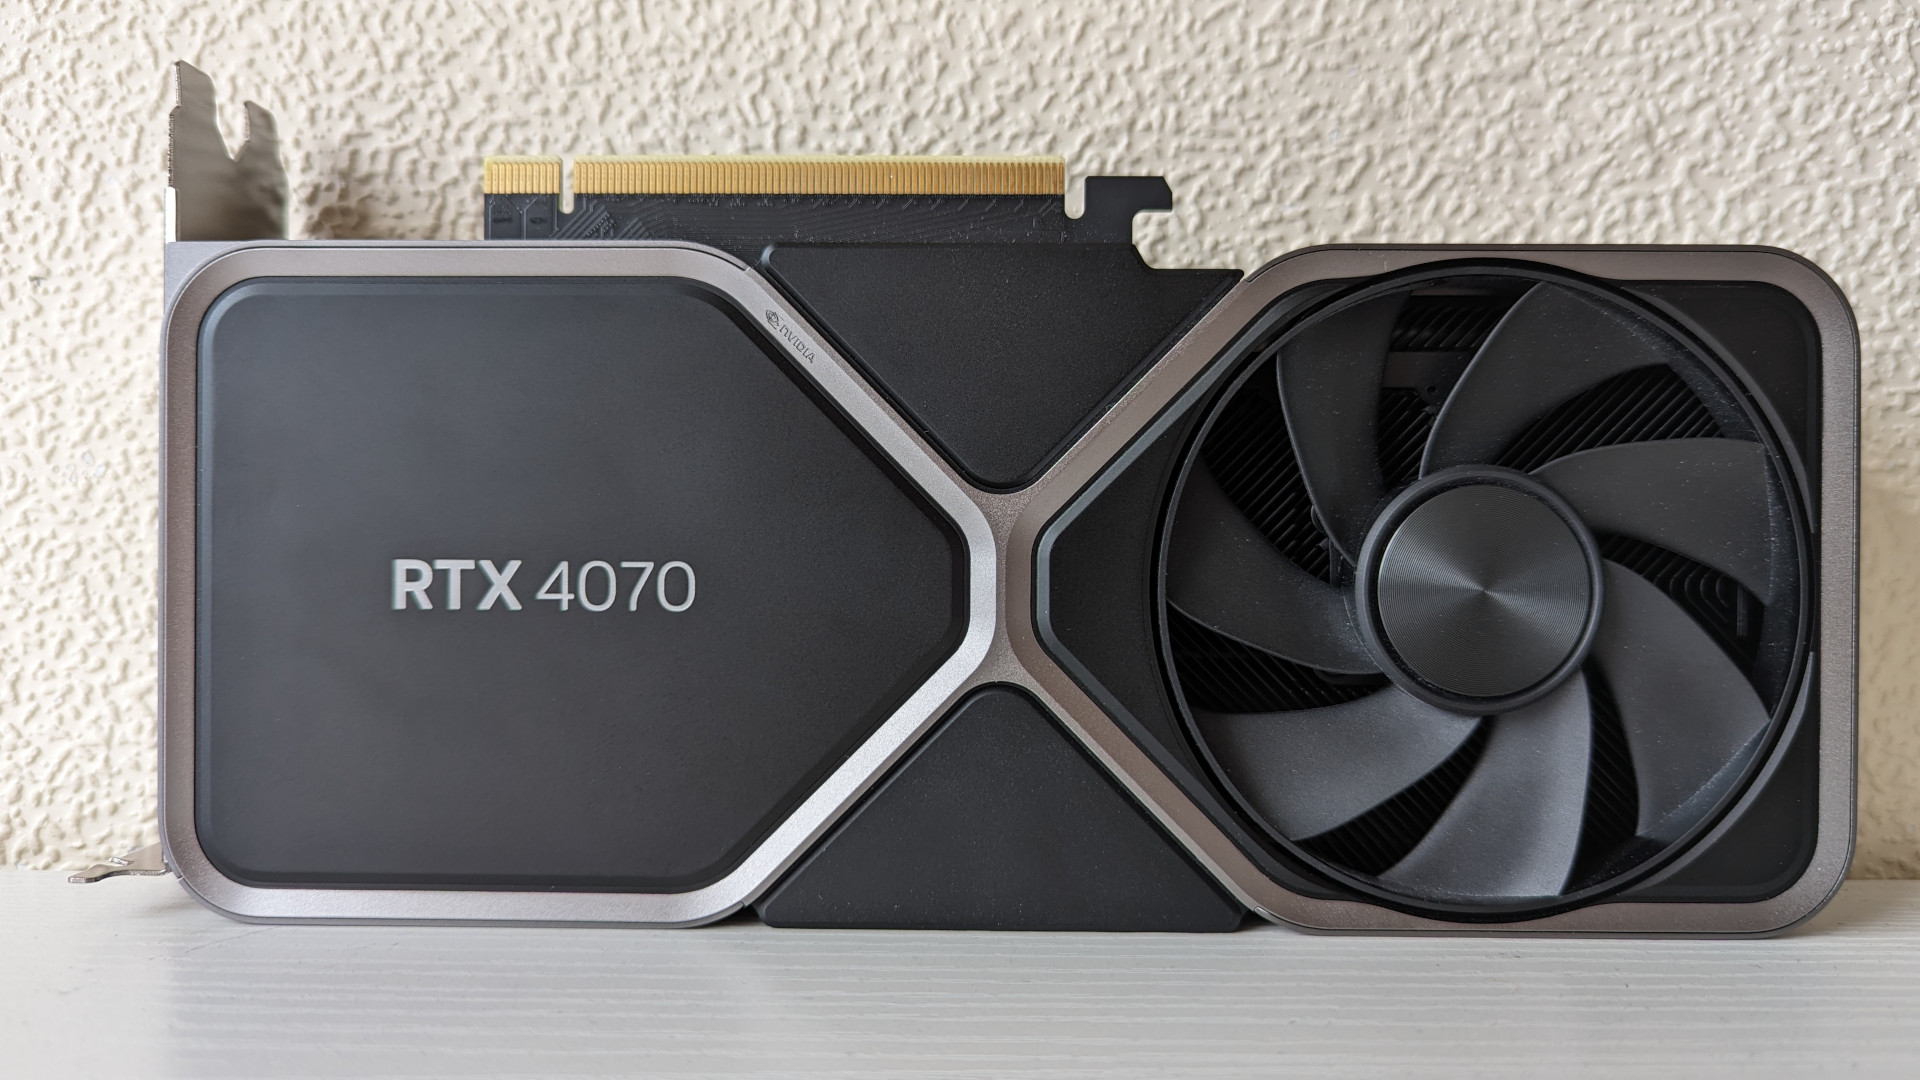 Nvidia RTX 4070 price, specs, benchmarks, and where to buy